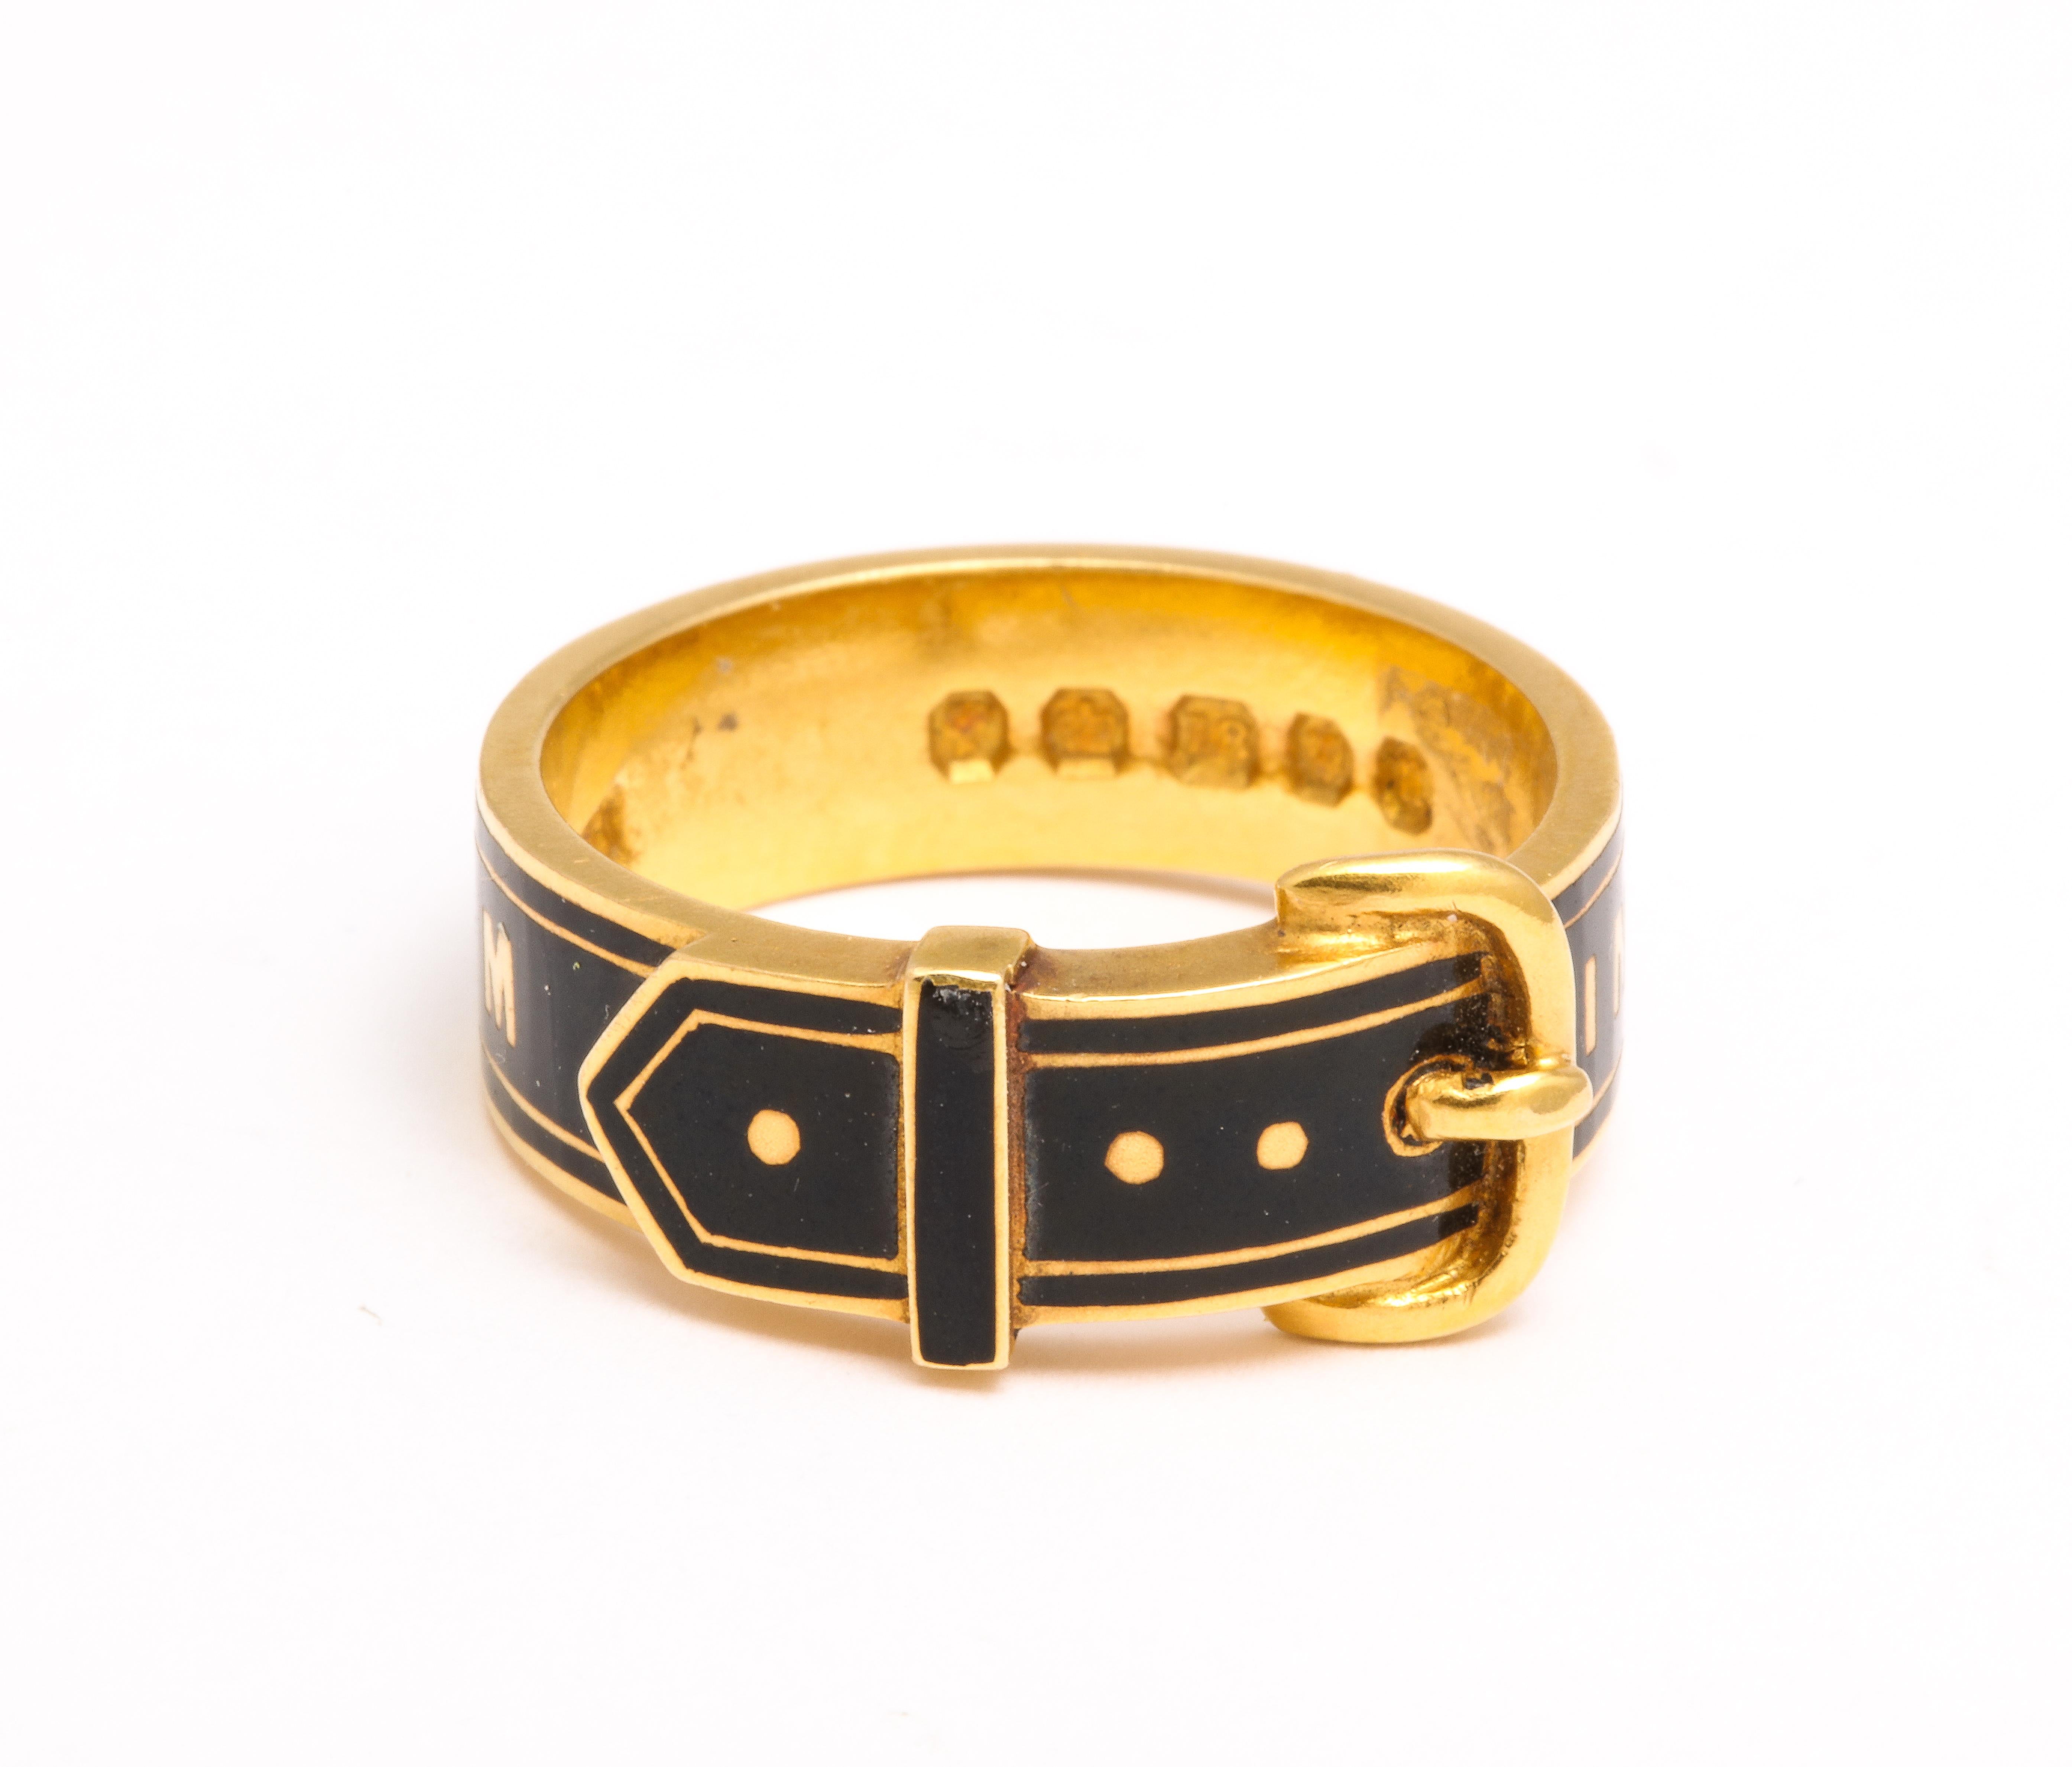 A pristine 18 Kt buckle ring with graphic gold letters that say 